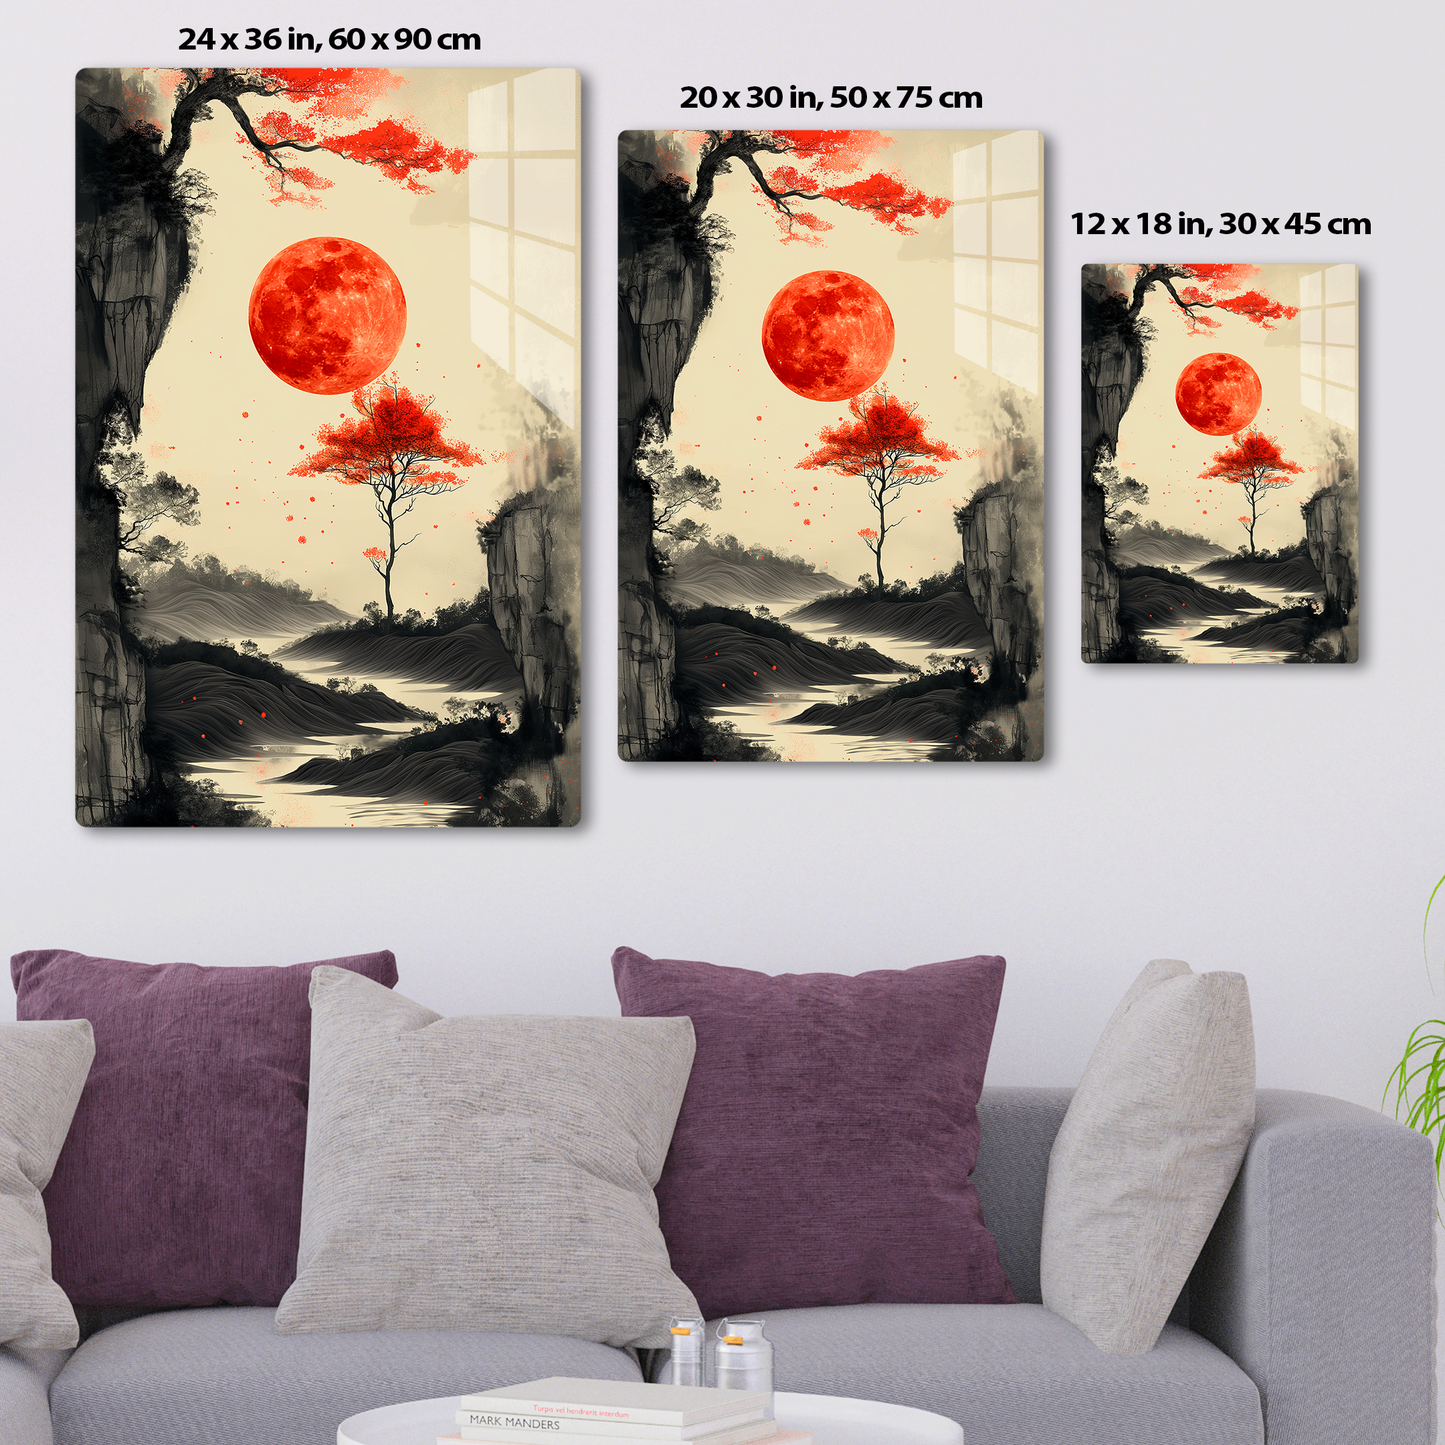 Scarlet Moonrise (Acrylic)Step into the universe with Ethereal landscape with a vivid red moon. Acrylic art from RimaGallery. Experience the cosmos in your home with vibrant, ethically crafteRimaGallery